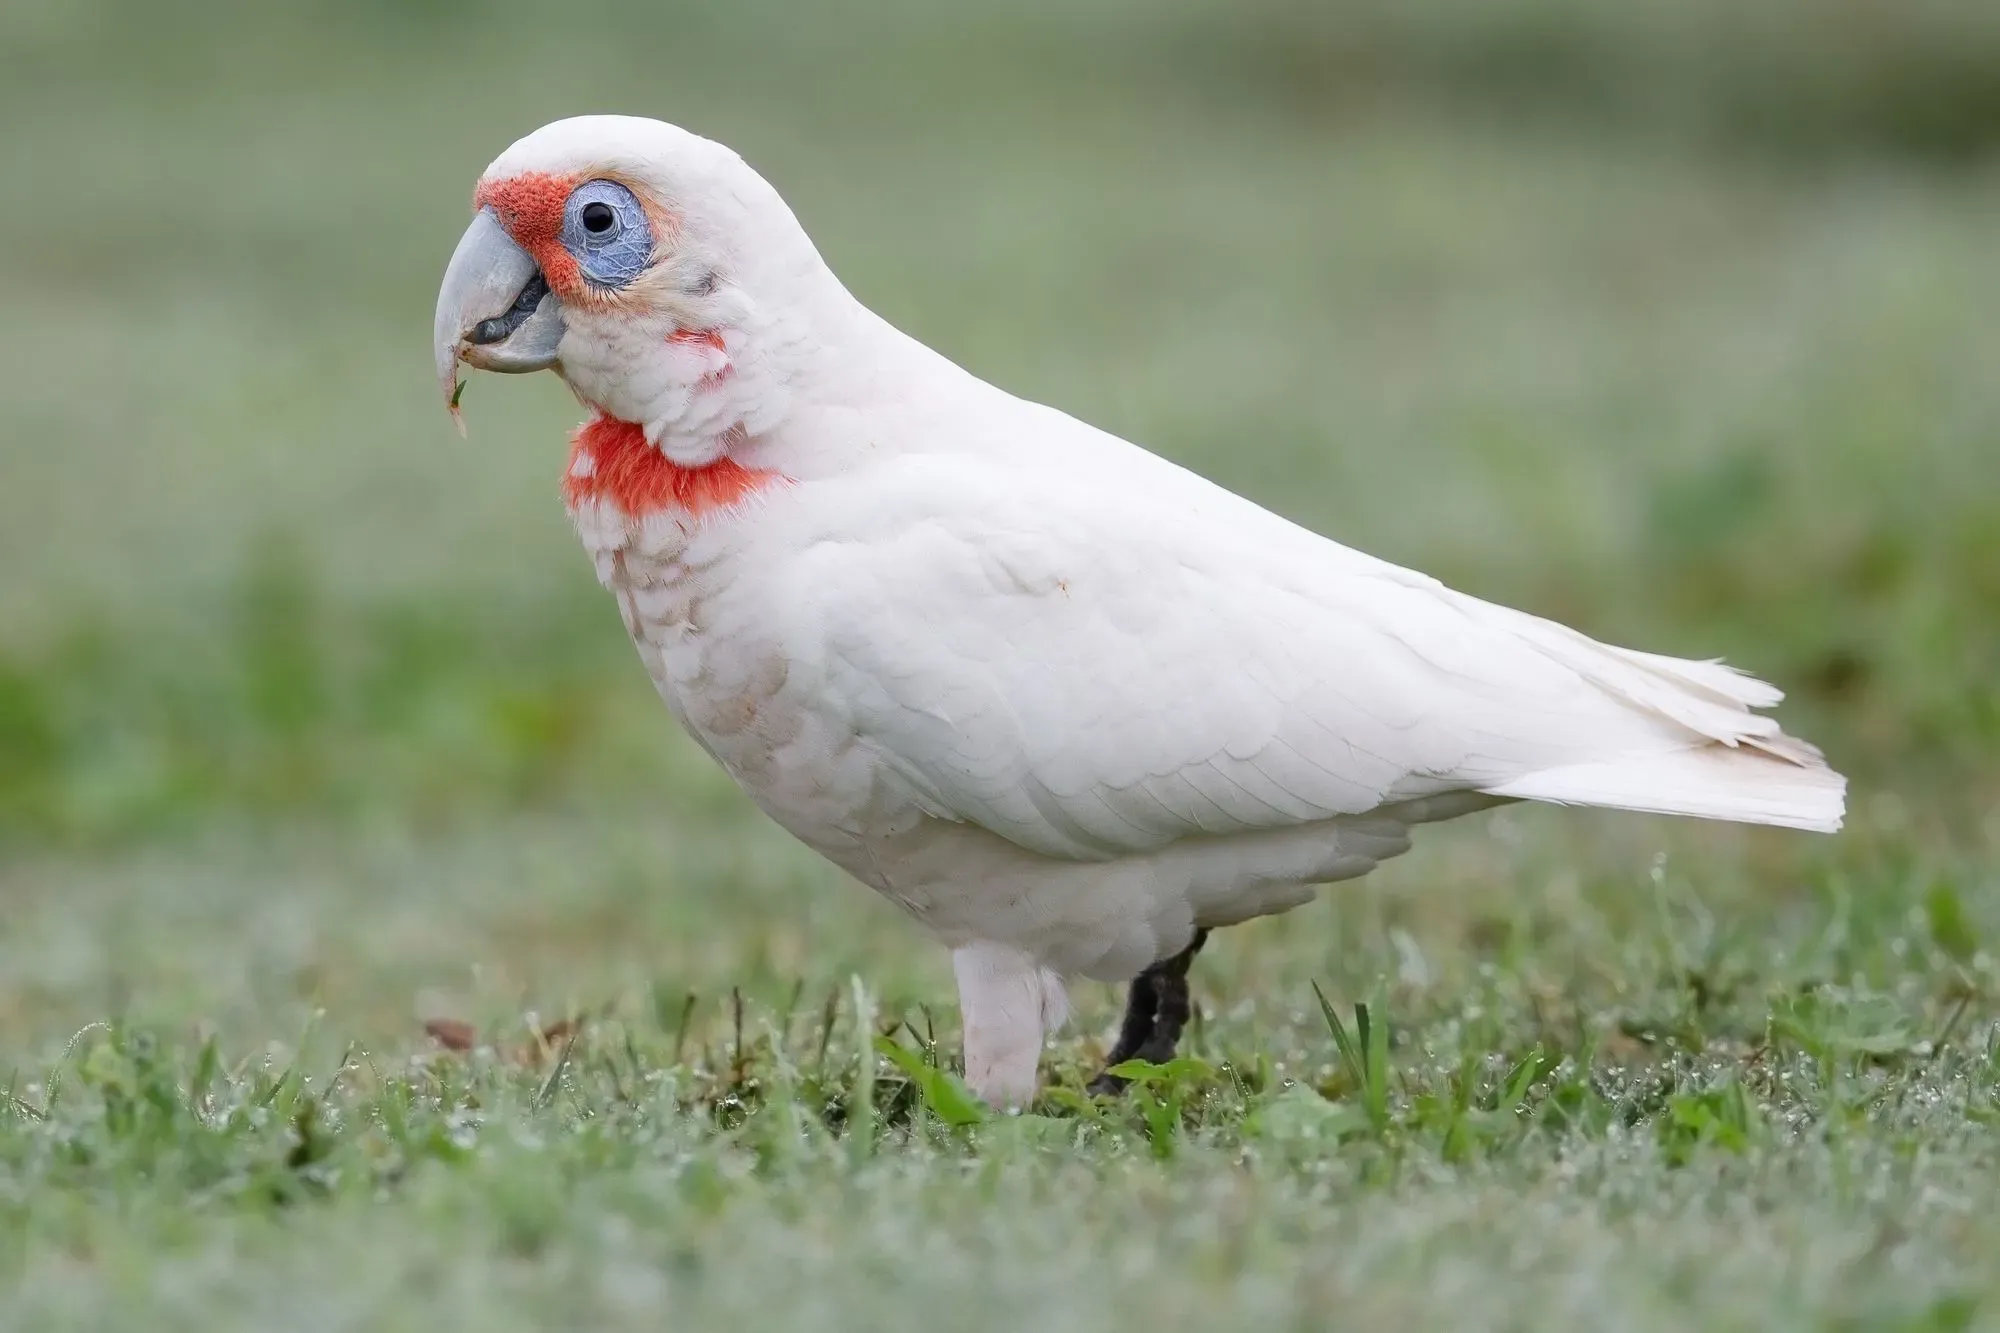 Slender-billed cockatoo has reddish-pink feathers on its breast and belly.